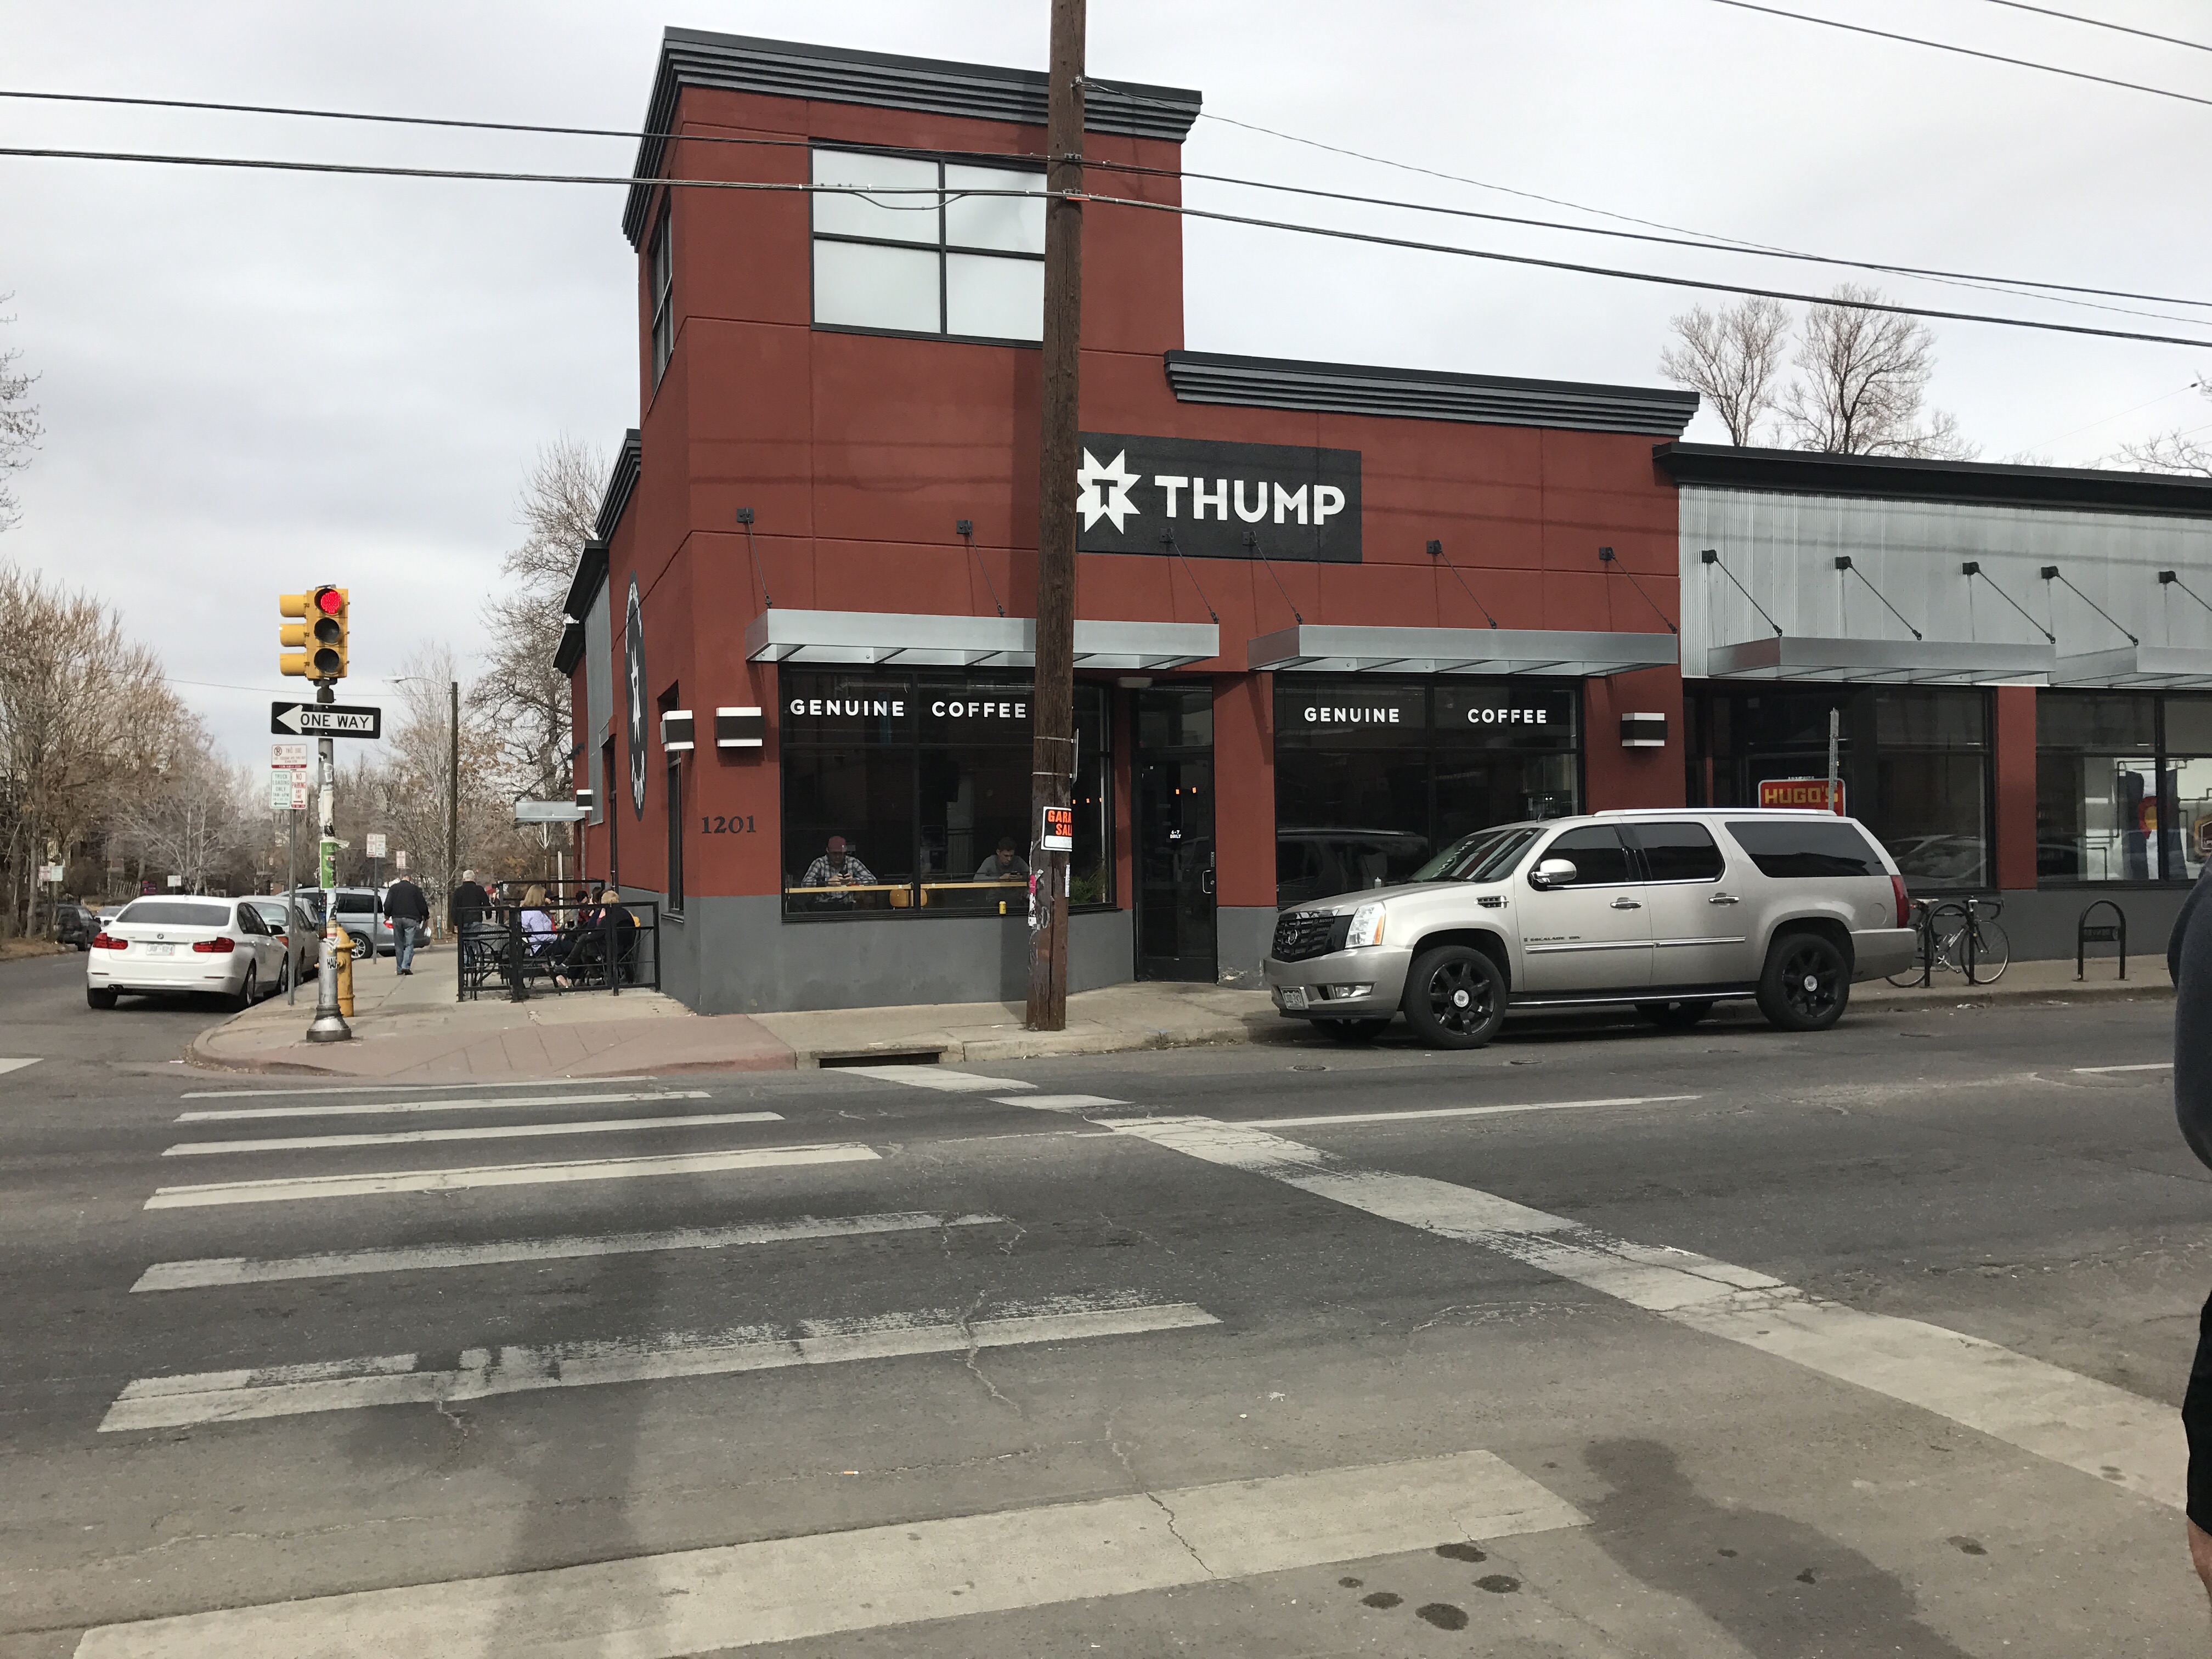 Thump Coffee in Denver, CO